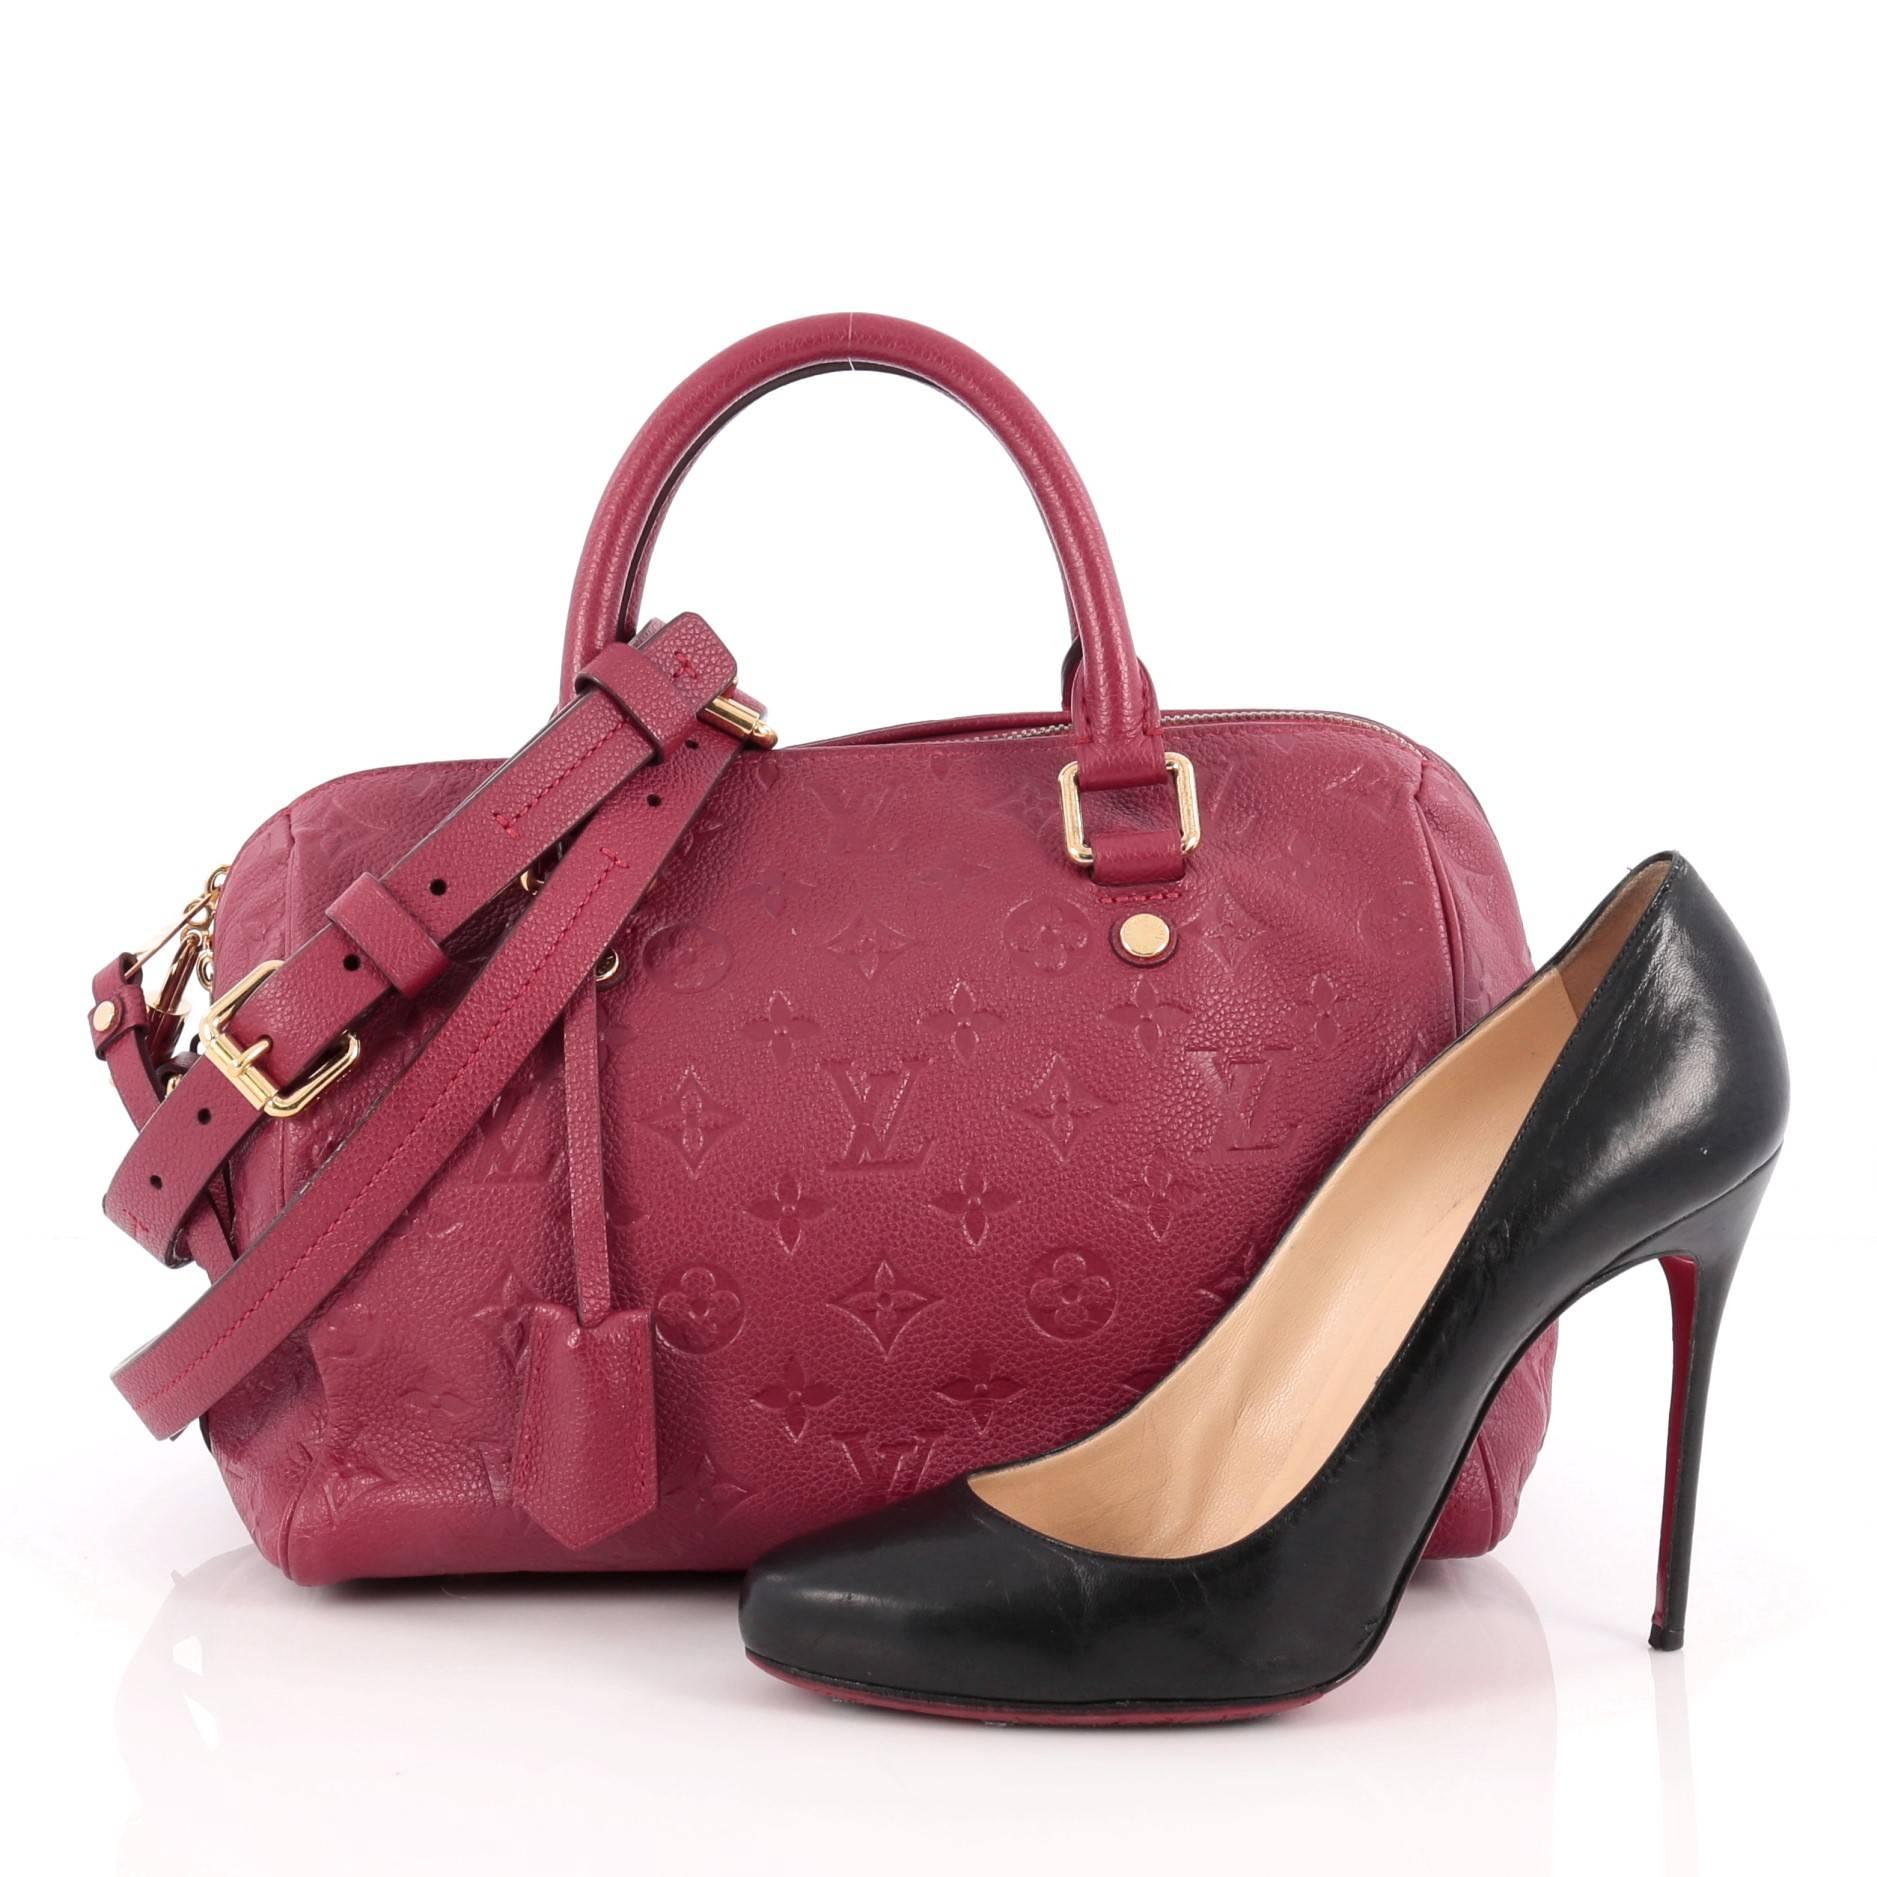 This authentic Louis Vuitton Speedy Bandouliere Bag Monogram Empreinte Leather 25 is a modern must-have. Constructed from Louis Vuitton's luxurious jaipur raspberry red monogram embossed empreinte leather, this iconic and re-imagined Speedy features